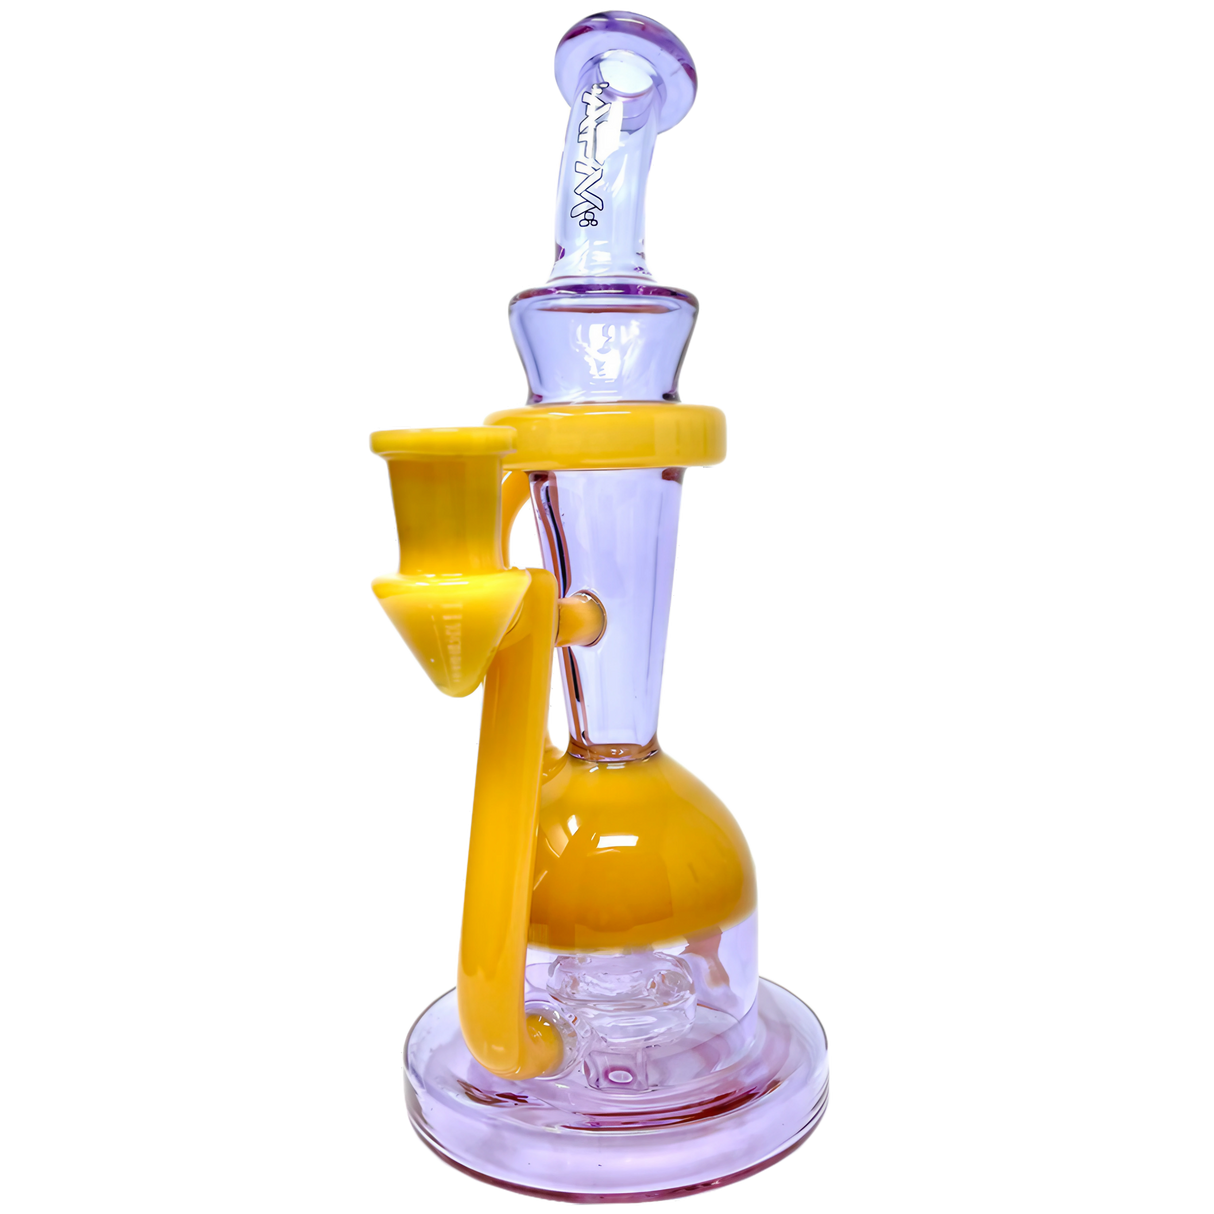 AFM Spaceship Cycler 9" Dab Rig in Purple/Orange with Percolator, Front View on White Background